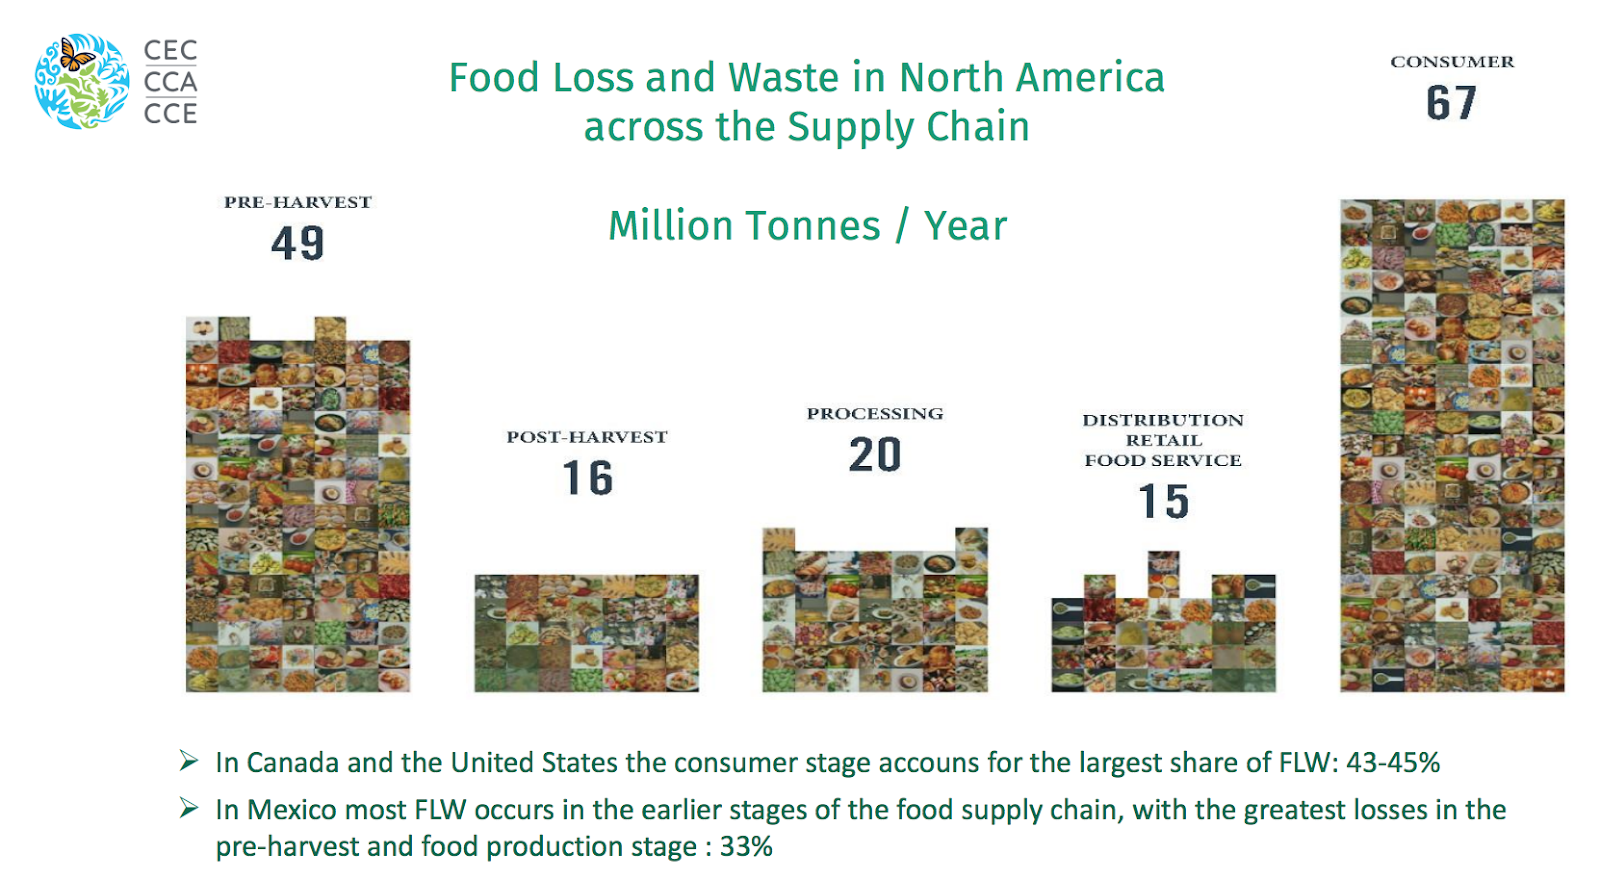 Food loss and waste (FLW) in North America across the supply chain per million tonnes per year. 